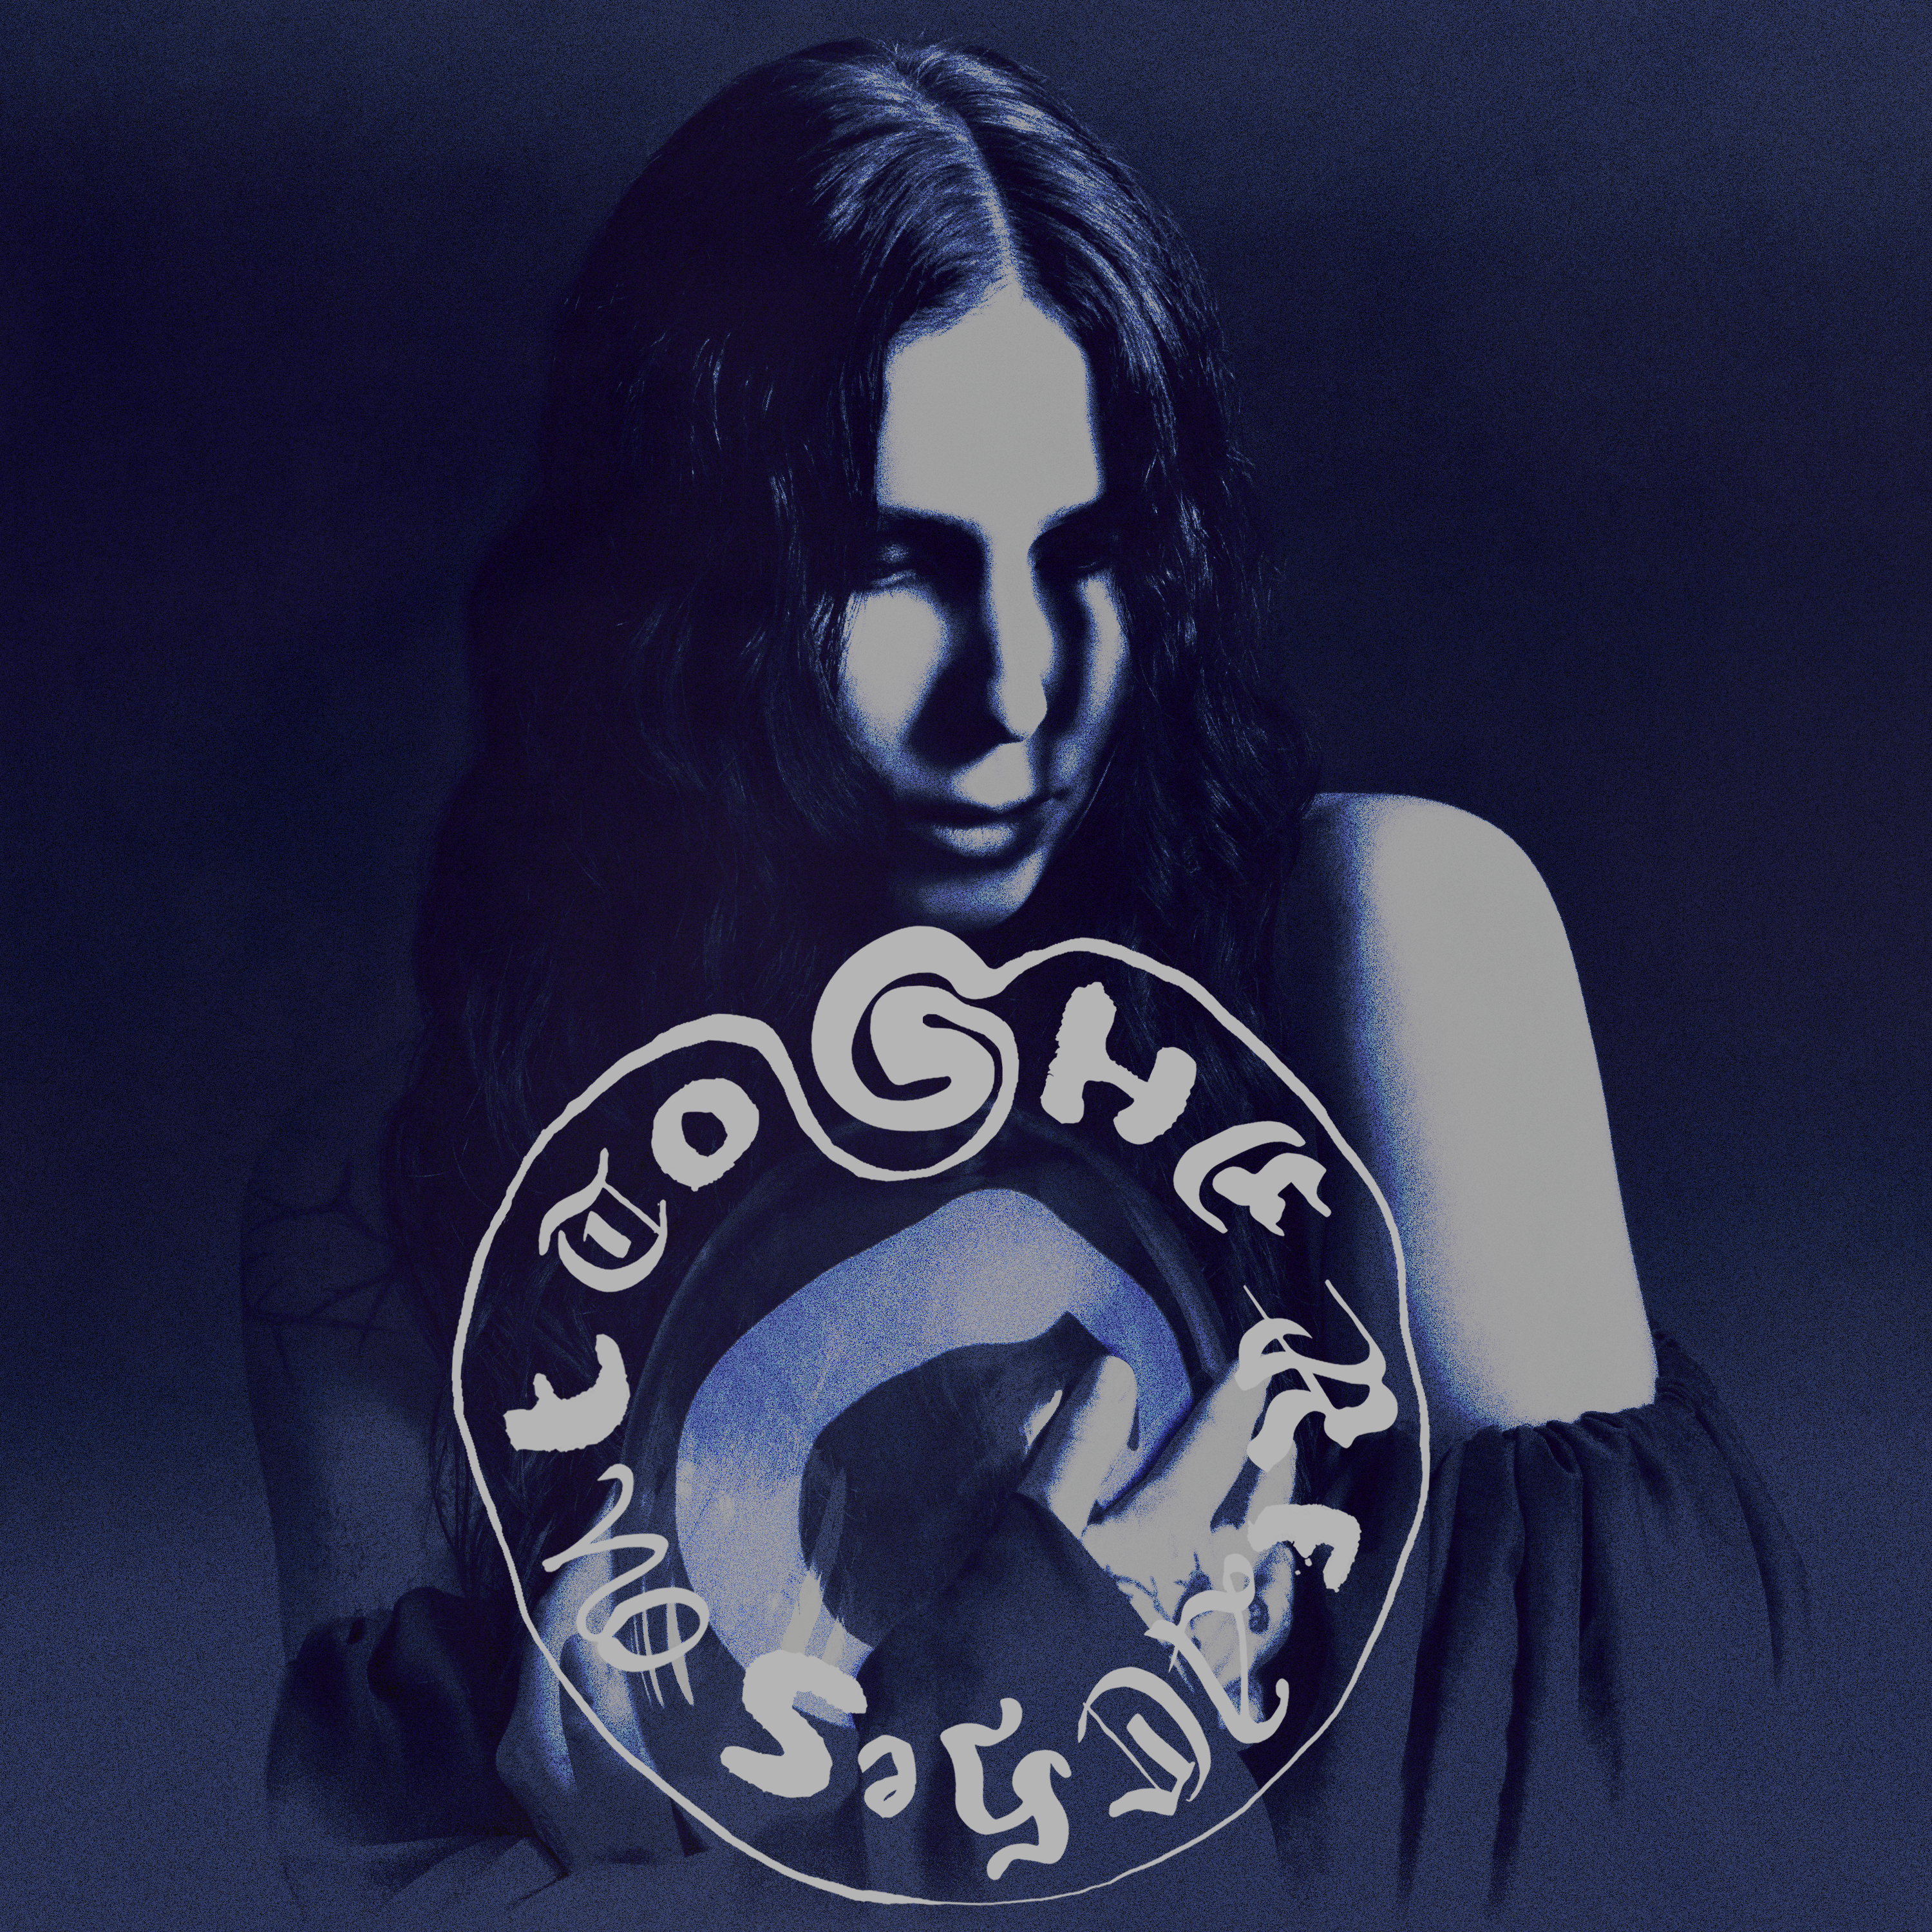 Chelsea Wolfe She Reaches Out To She Reaches Out To She (CD) Album (US IMPORT) - Bild 1 von 1